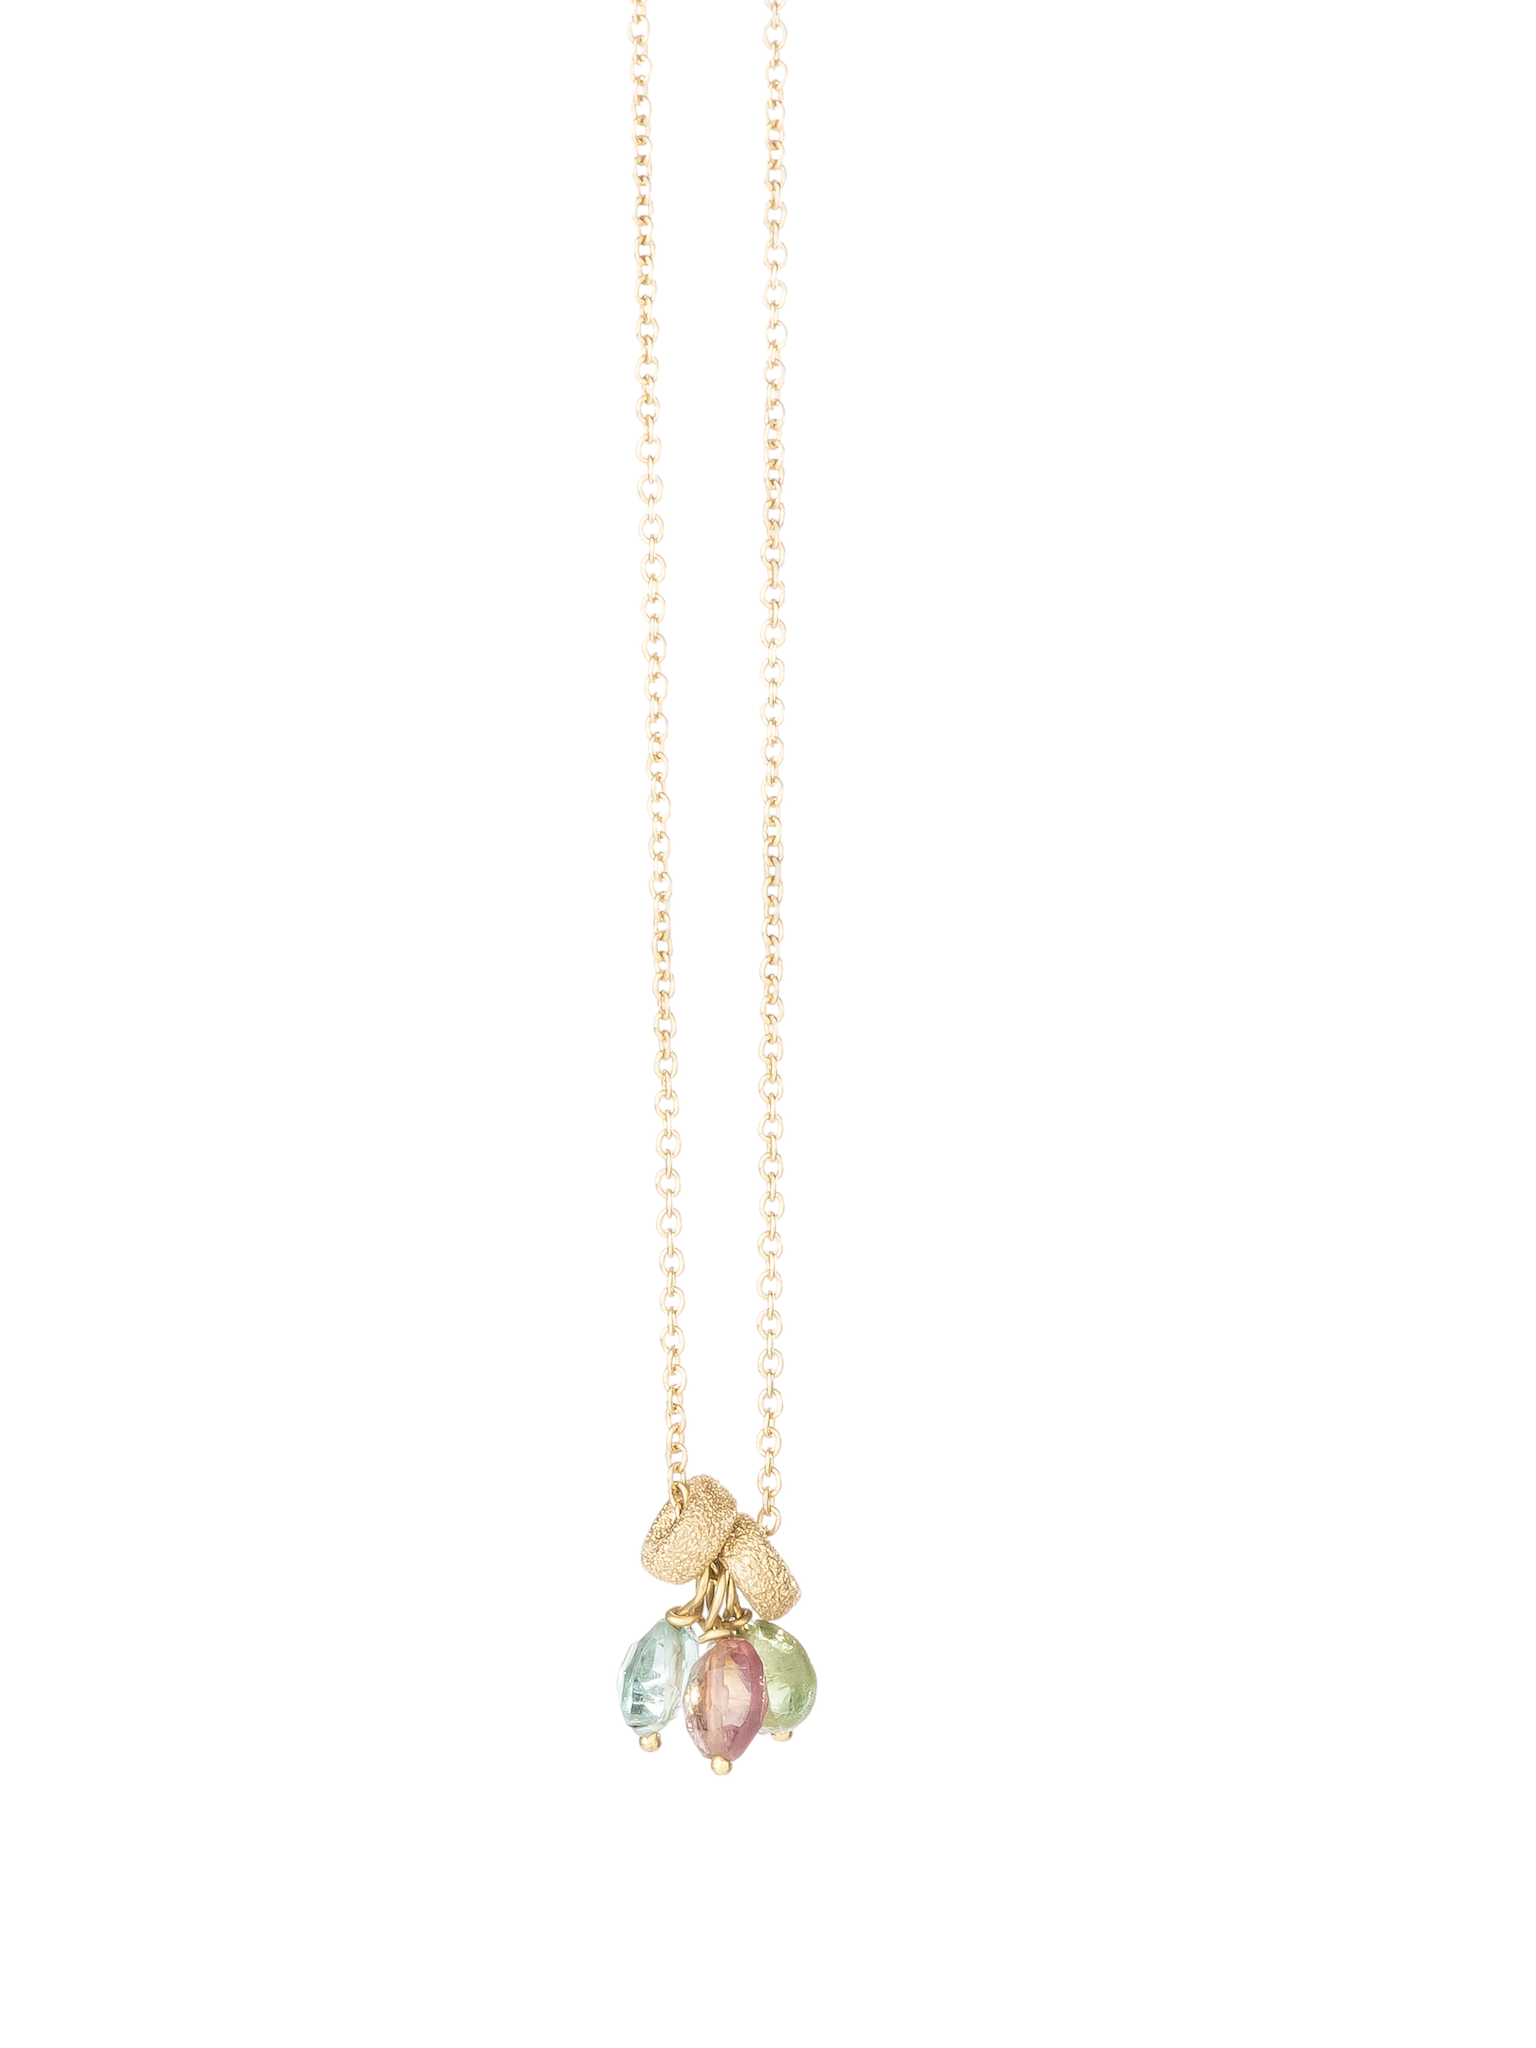 Gold bead and tourmaline necklace